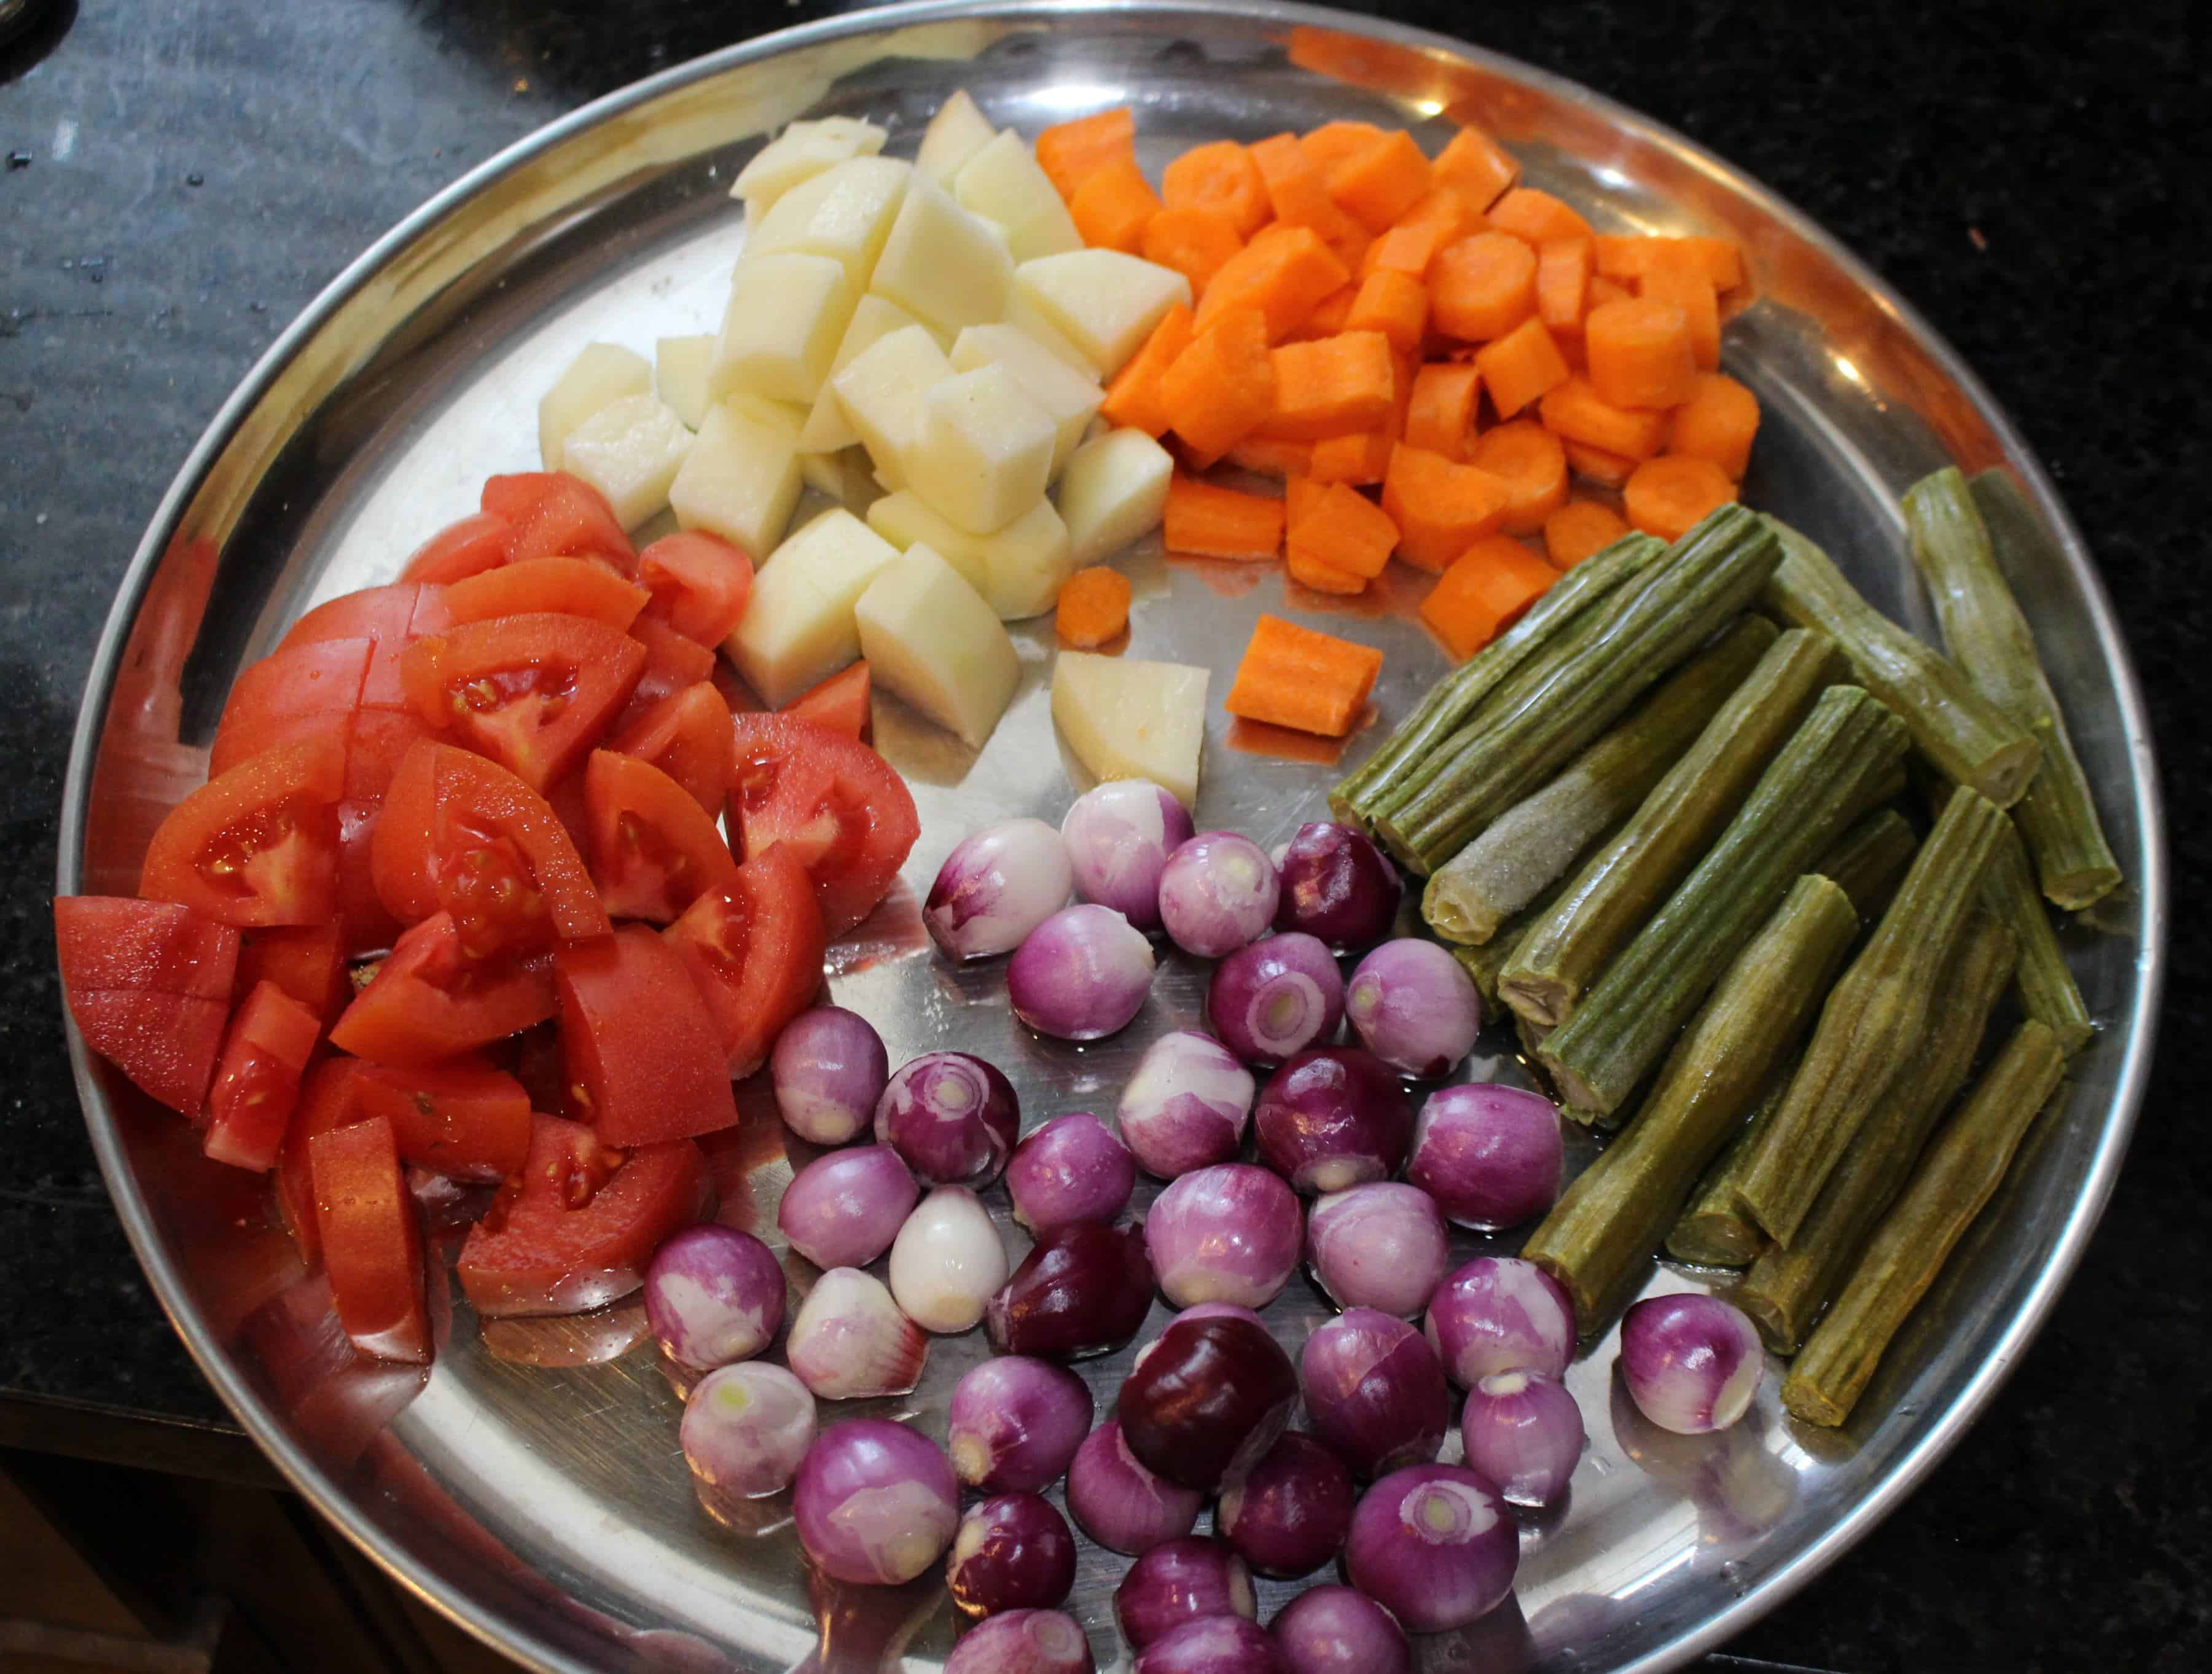 Chopped vegetables in a dish.